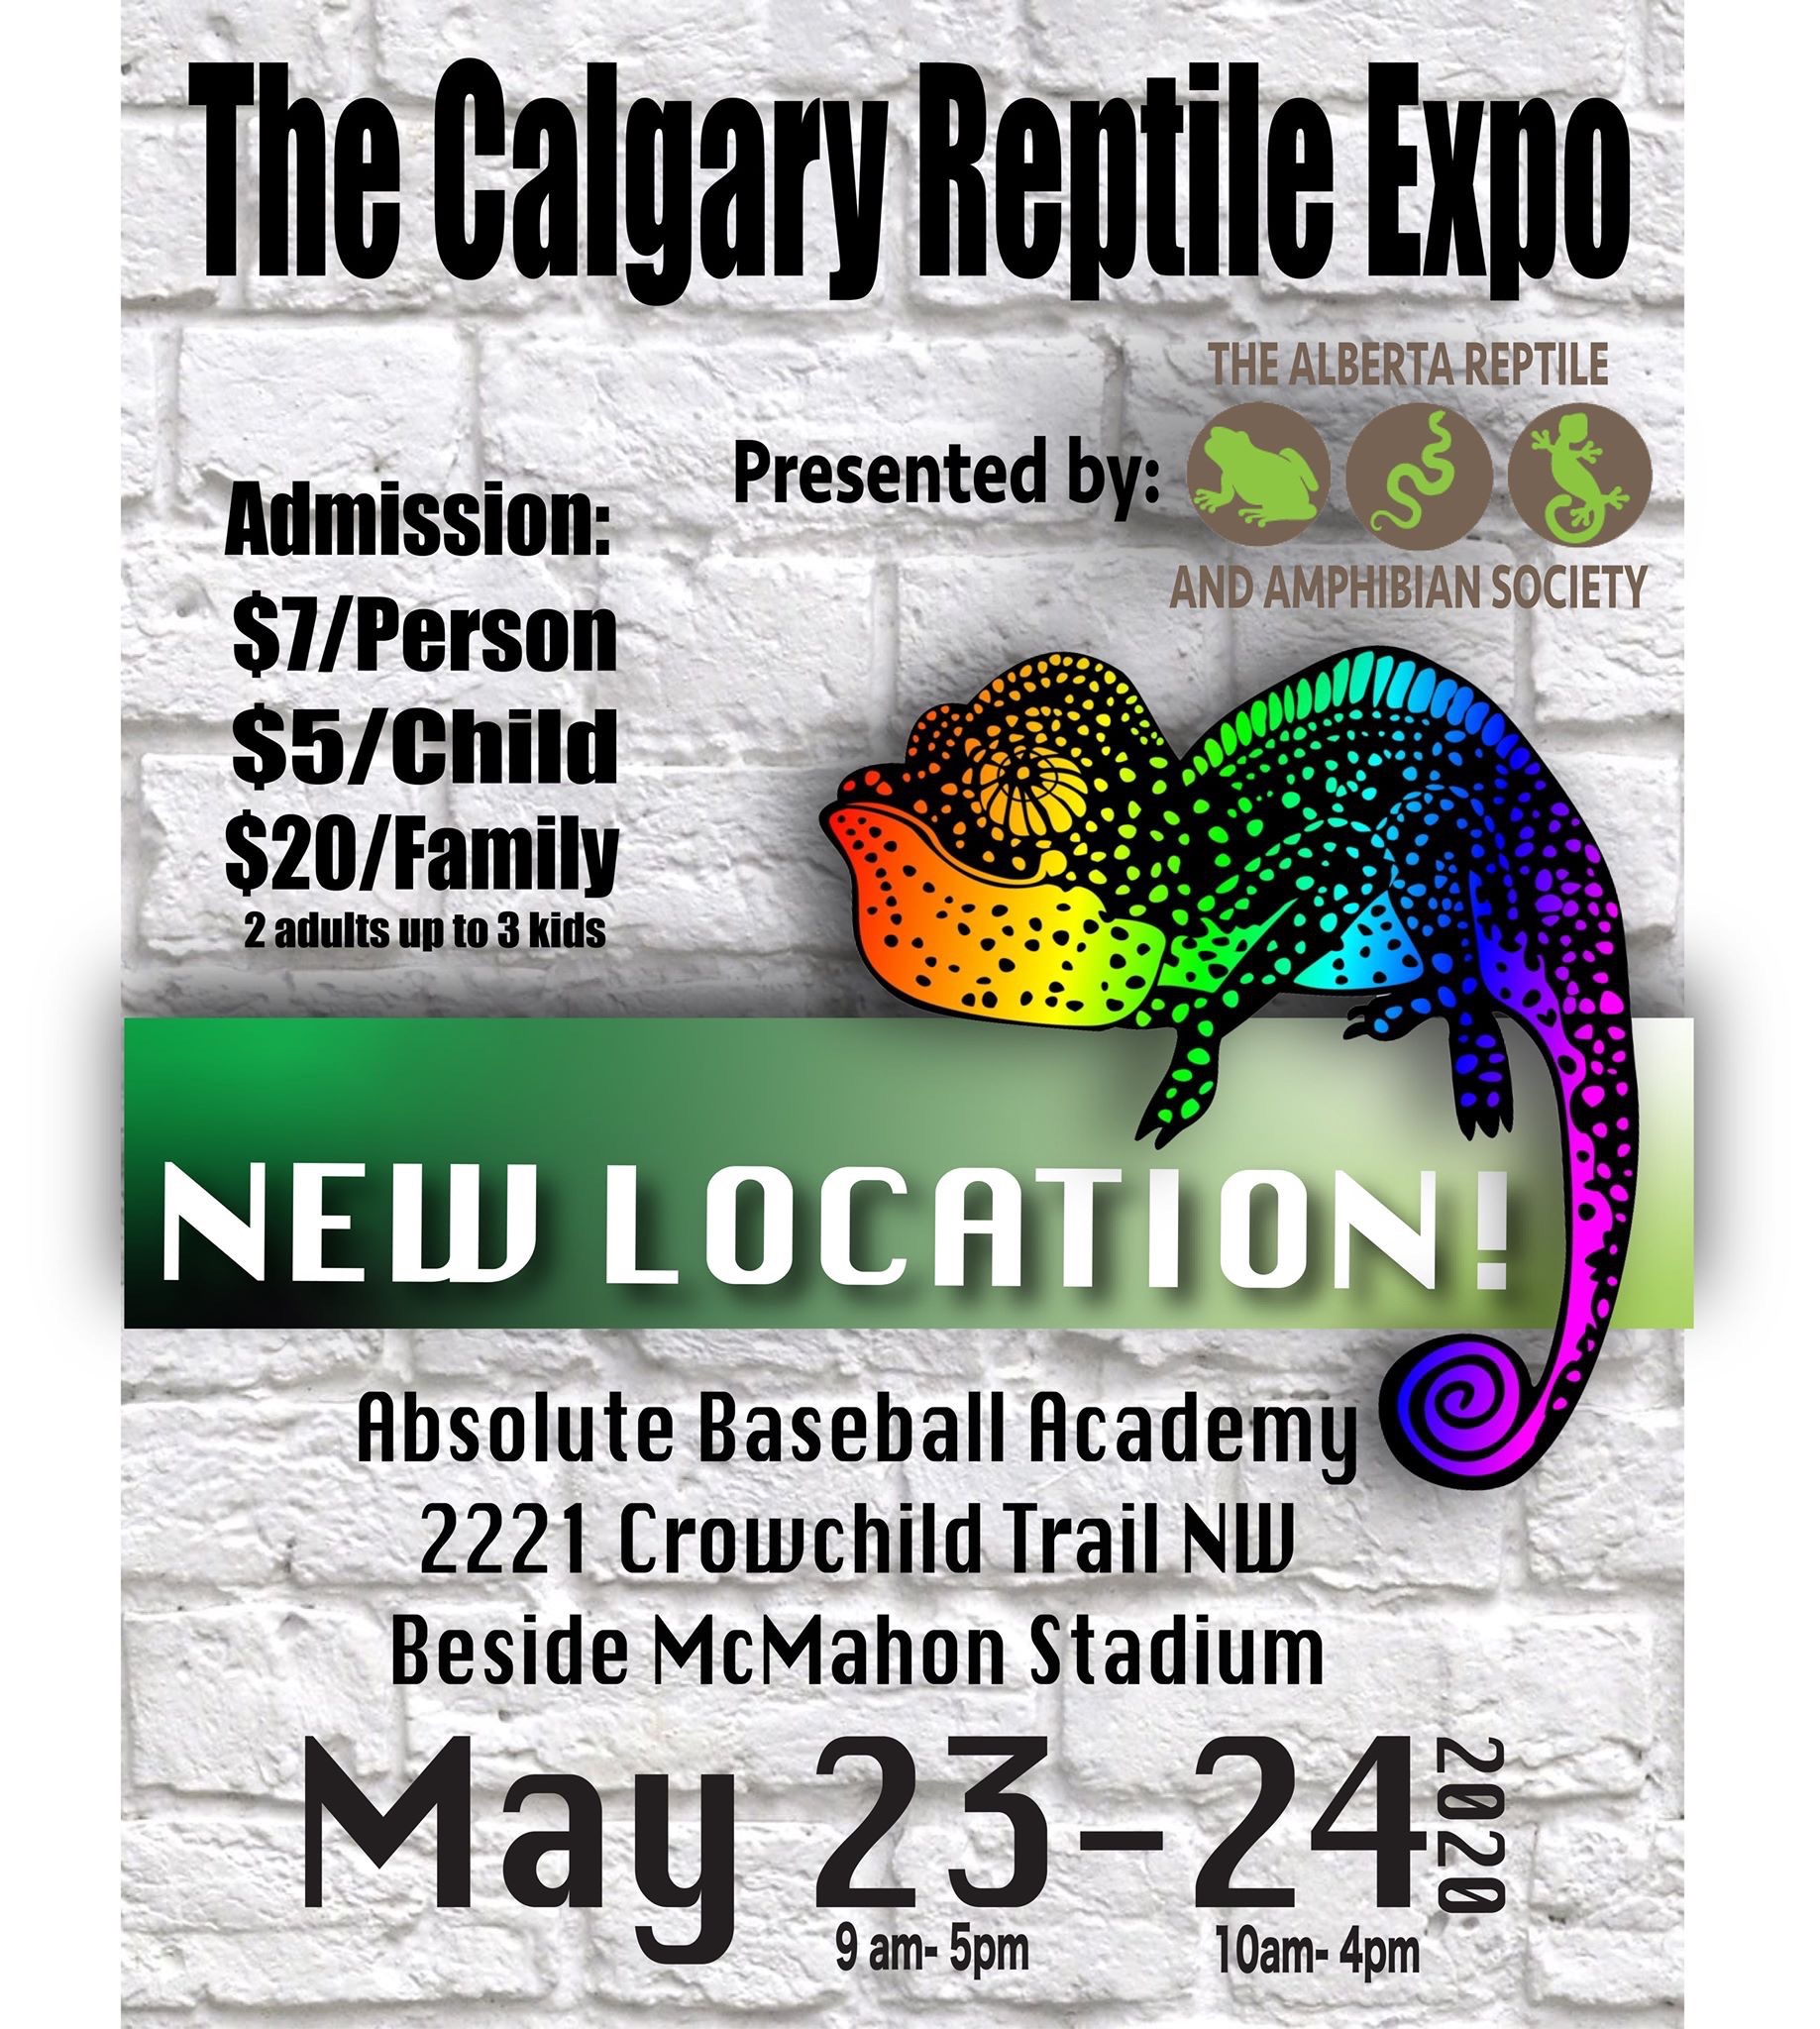 Reptile Expos Of Western Canada Spring And Summer 2020 Jungle Jewel